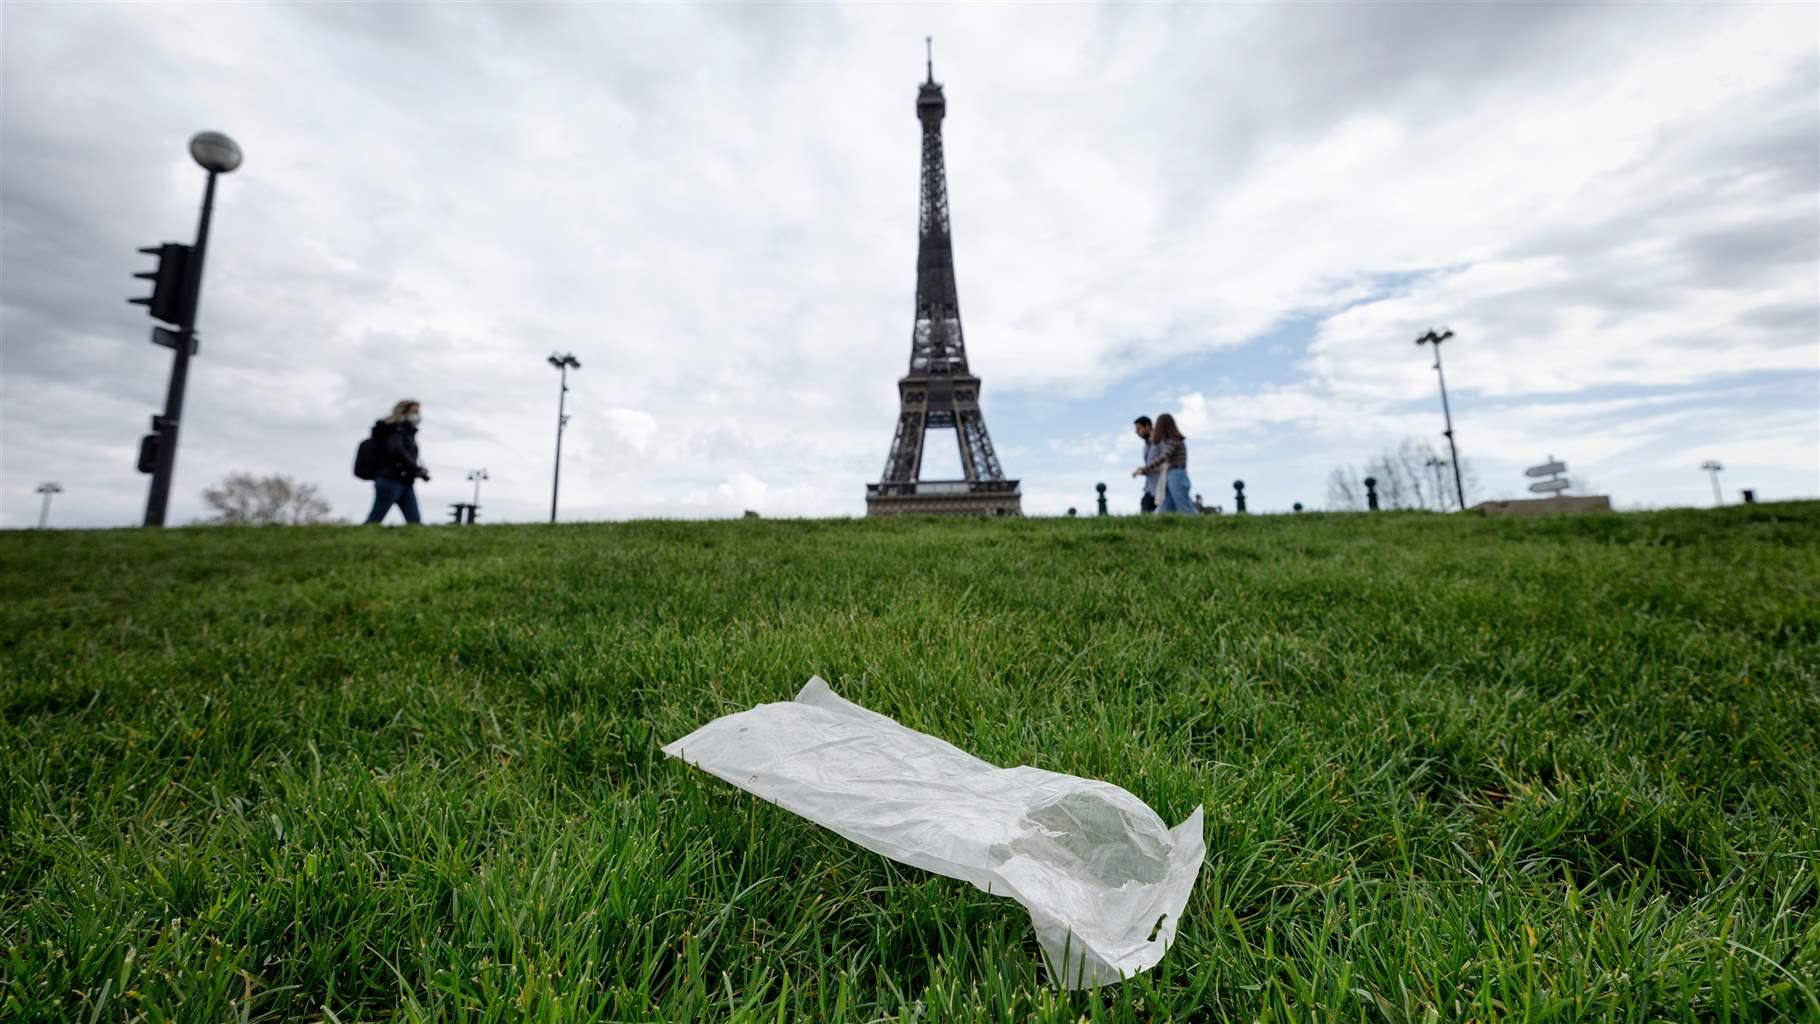 A white, medium-sized plastic bag lies on a thick lawn of grass. In the background is the Eiffel Tower, a number of lampposts, and three pedestrians passing by.